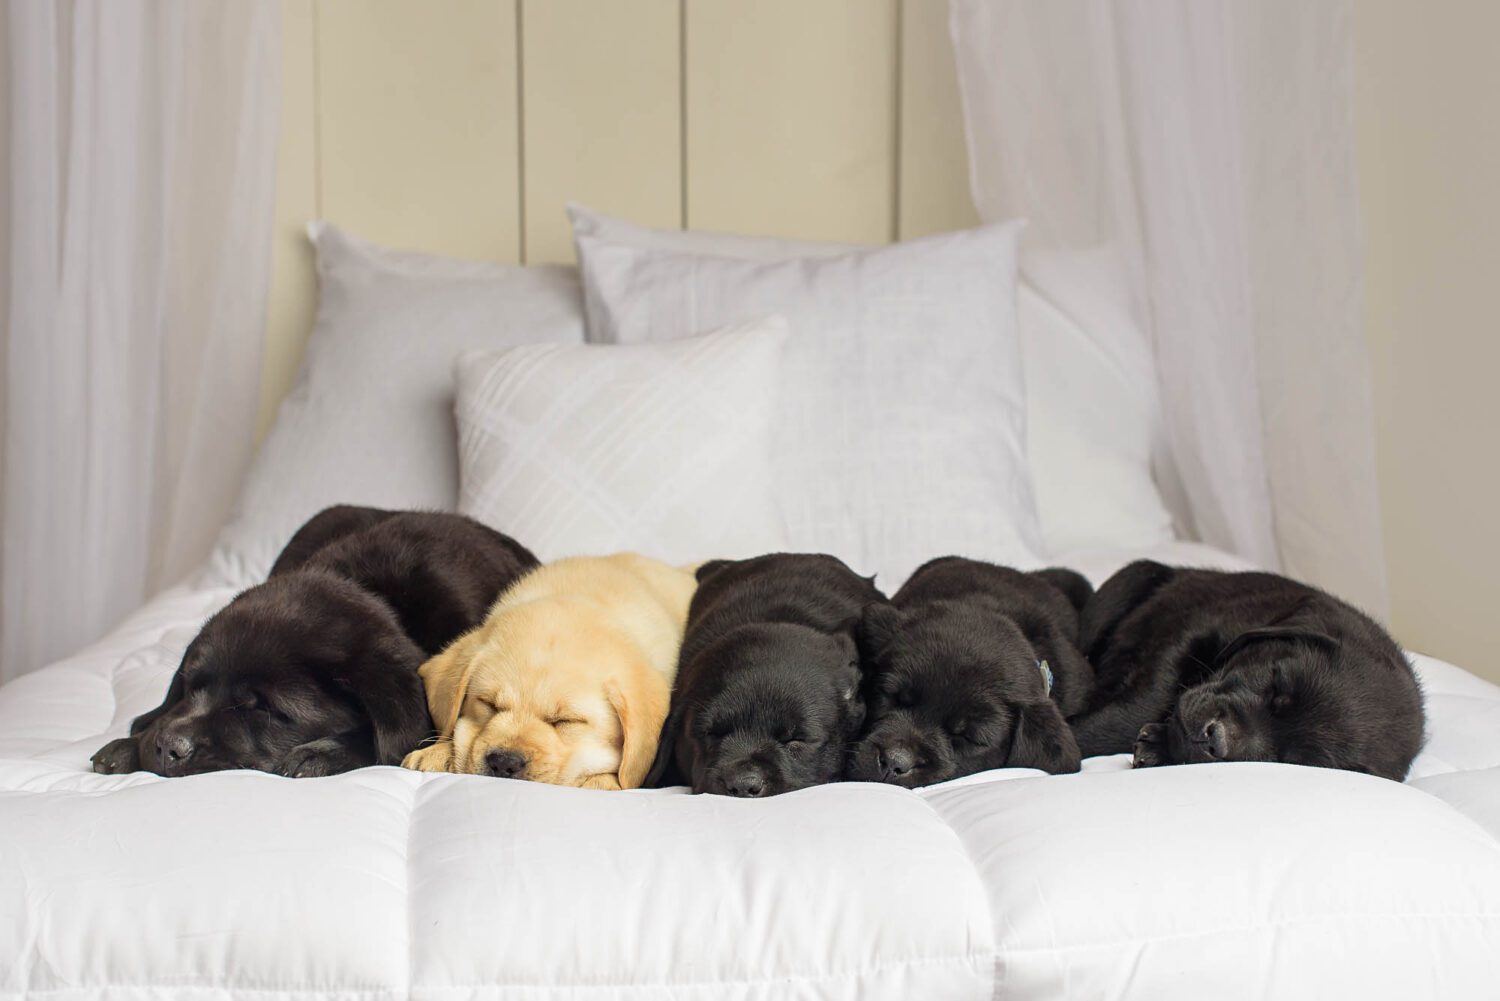 4 black lab puppies and one yellow lab puppy all sleep next to each other on a bed. 